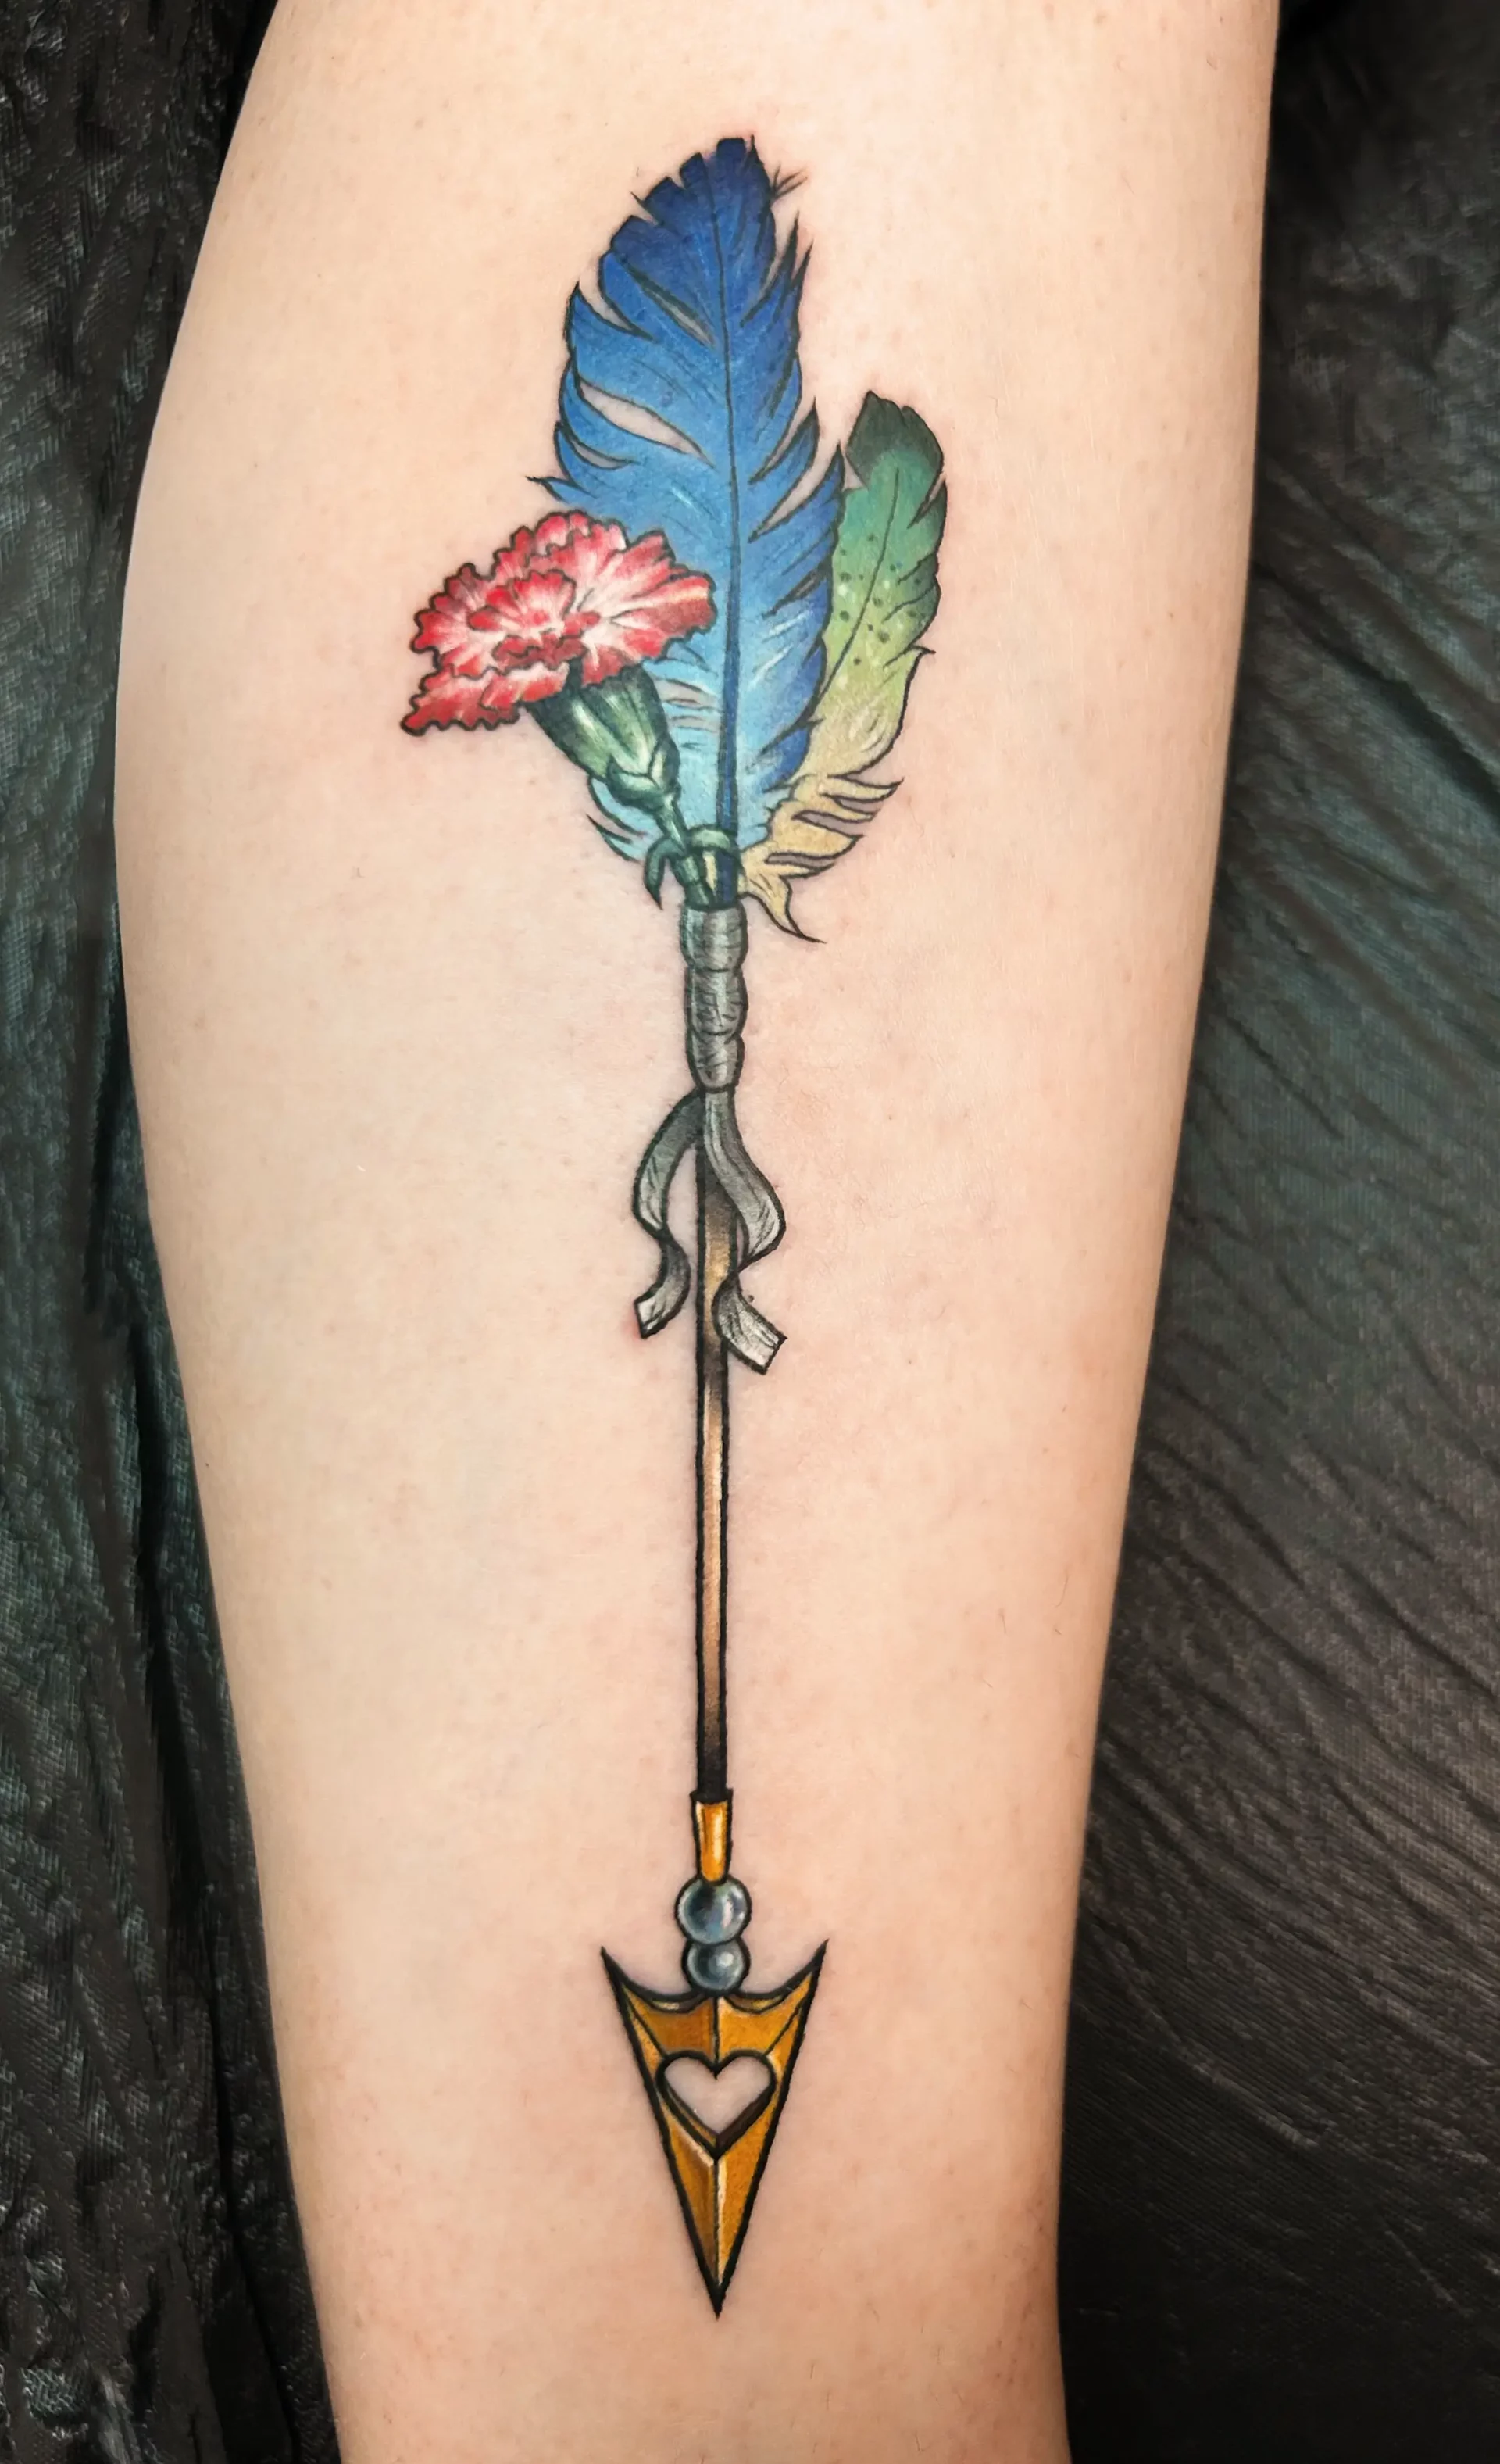 Colored arrow tattoo with feathers and flower